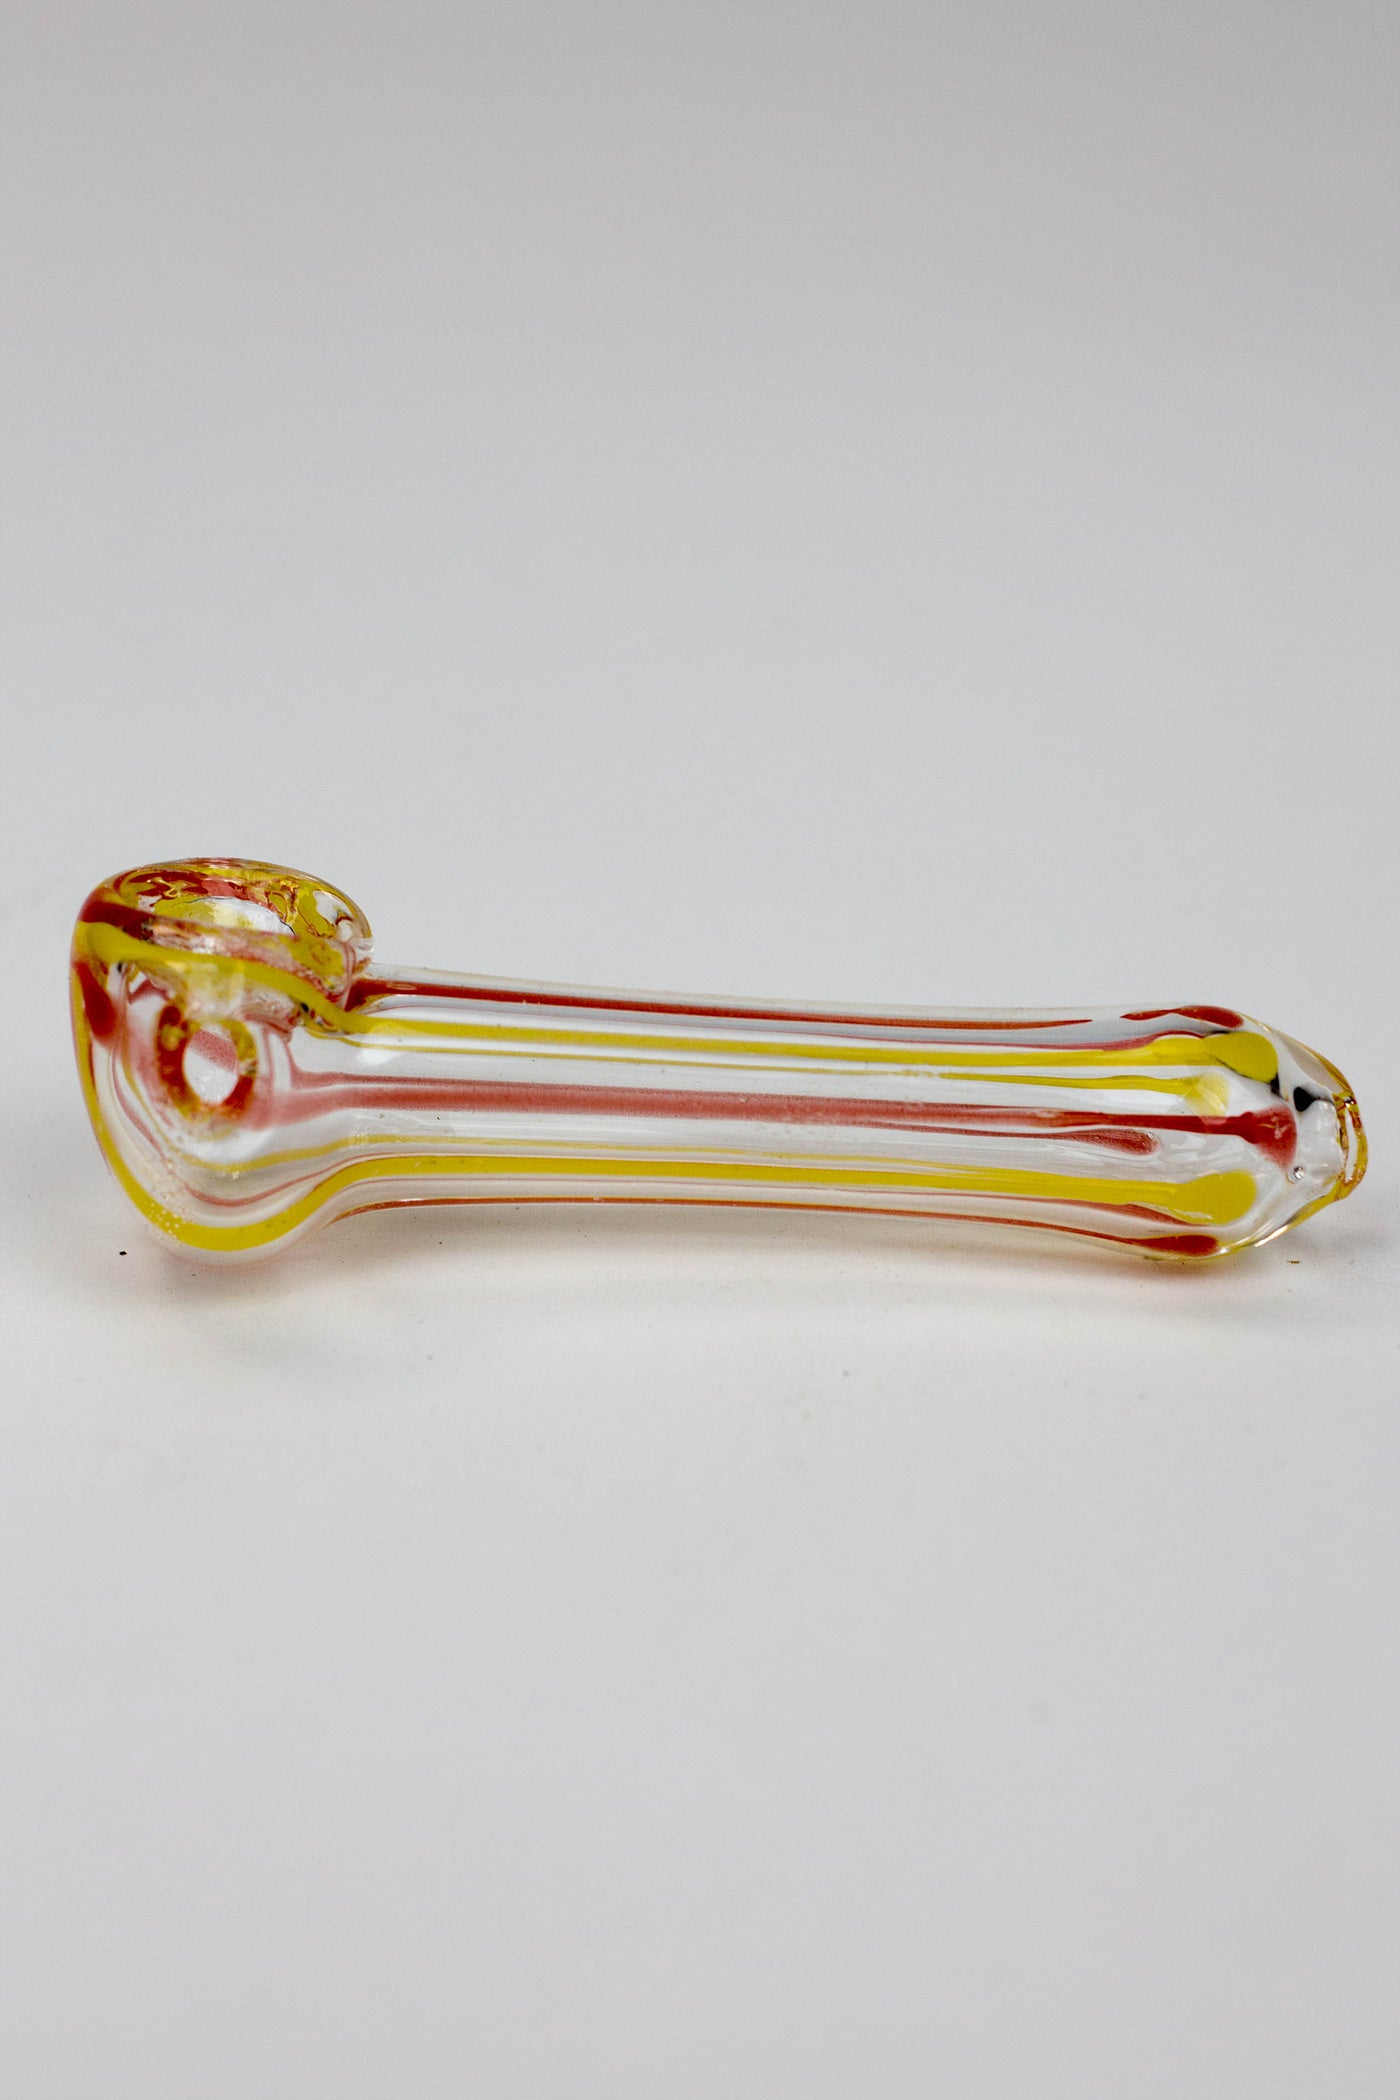 2.5" soft glass 8548 hand pipe - Pack of 5_1